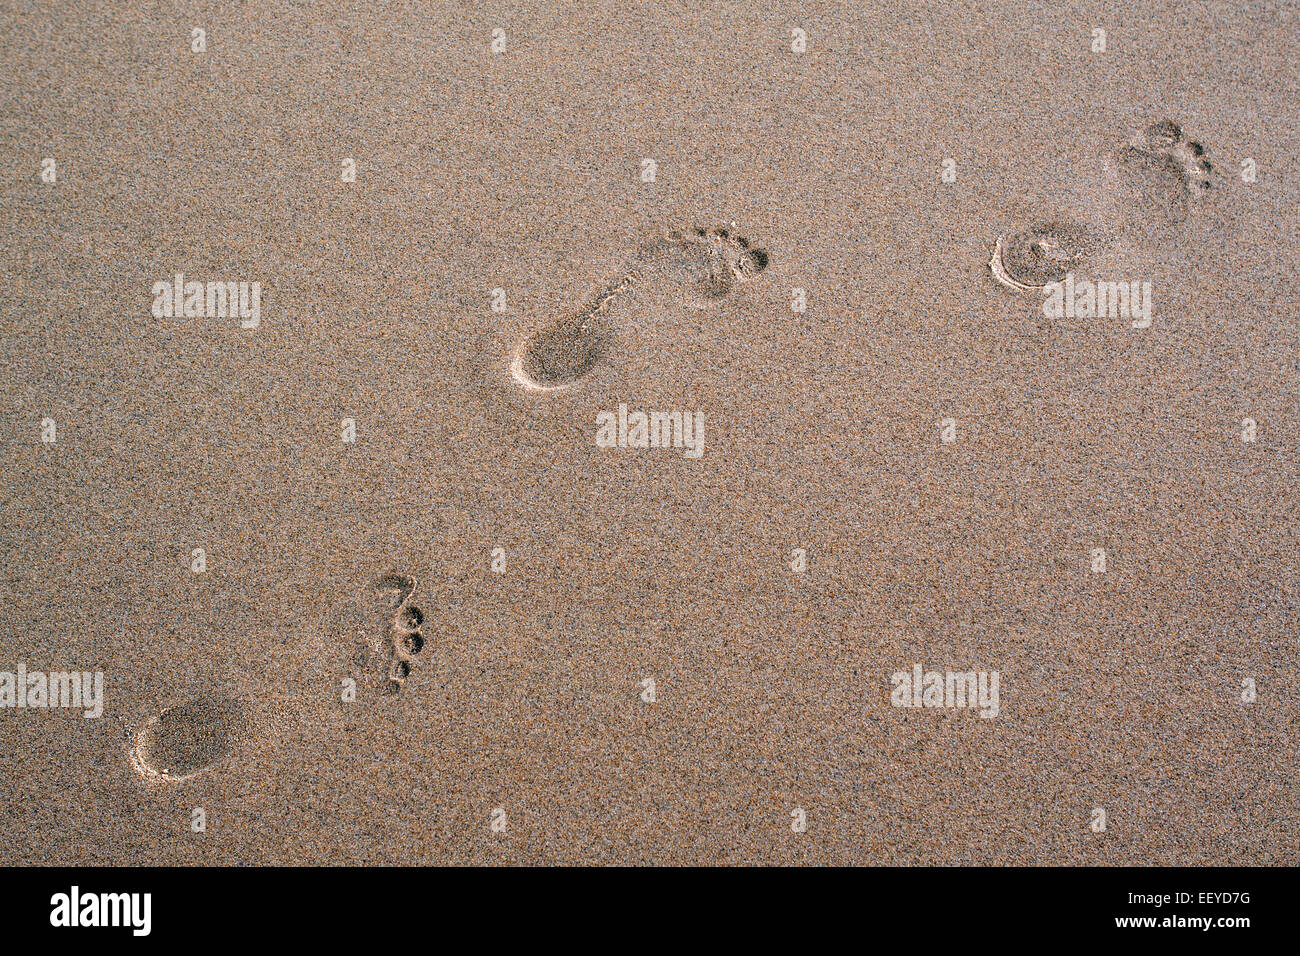 footprints in sand Stock Photo